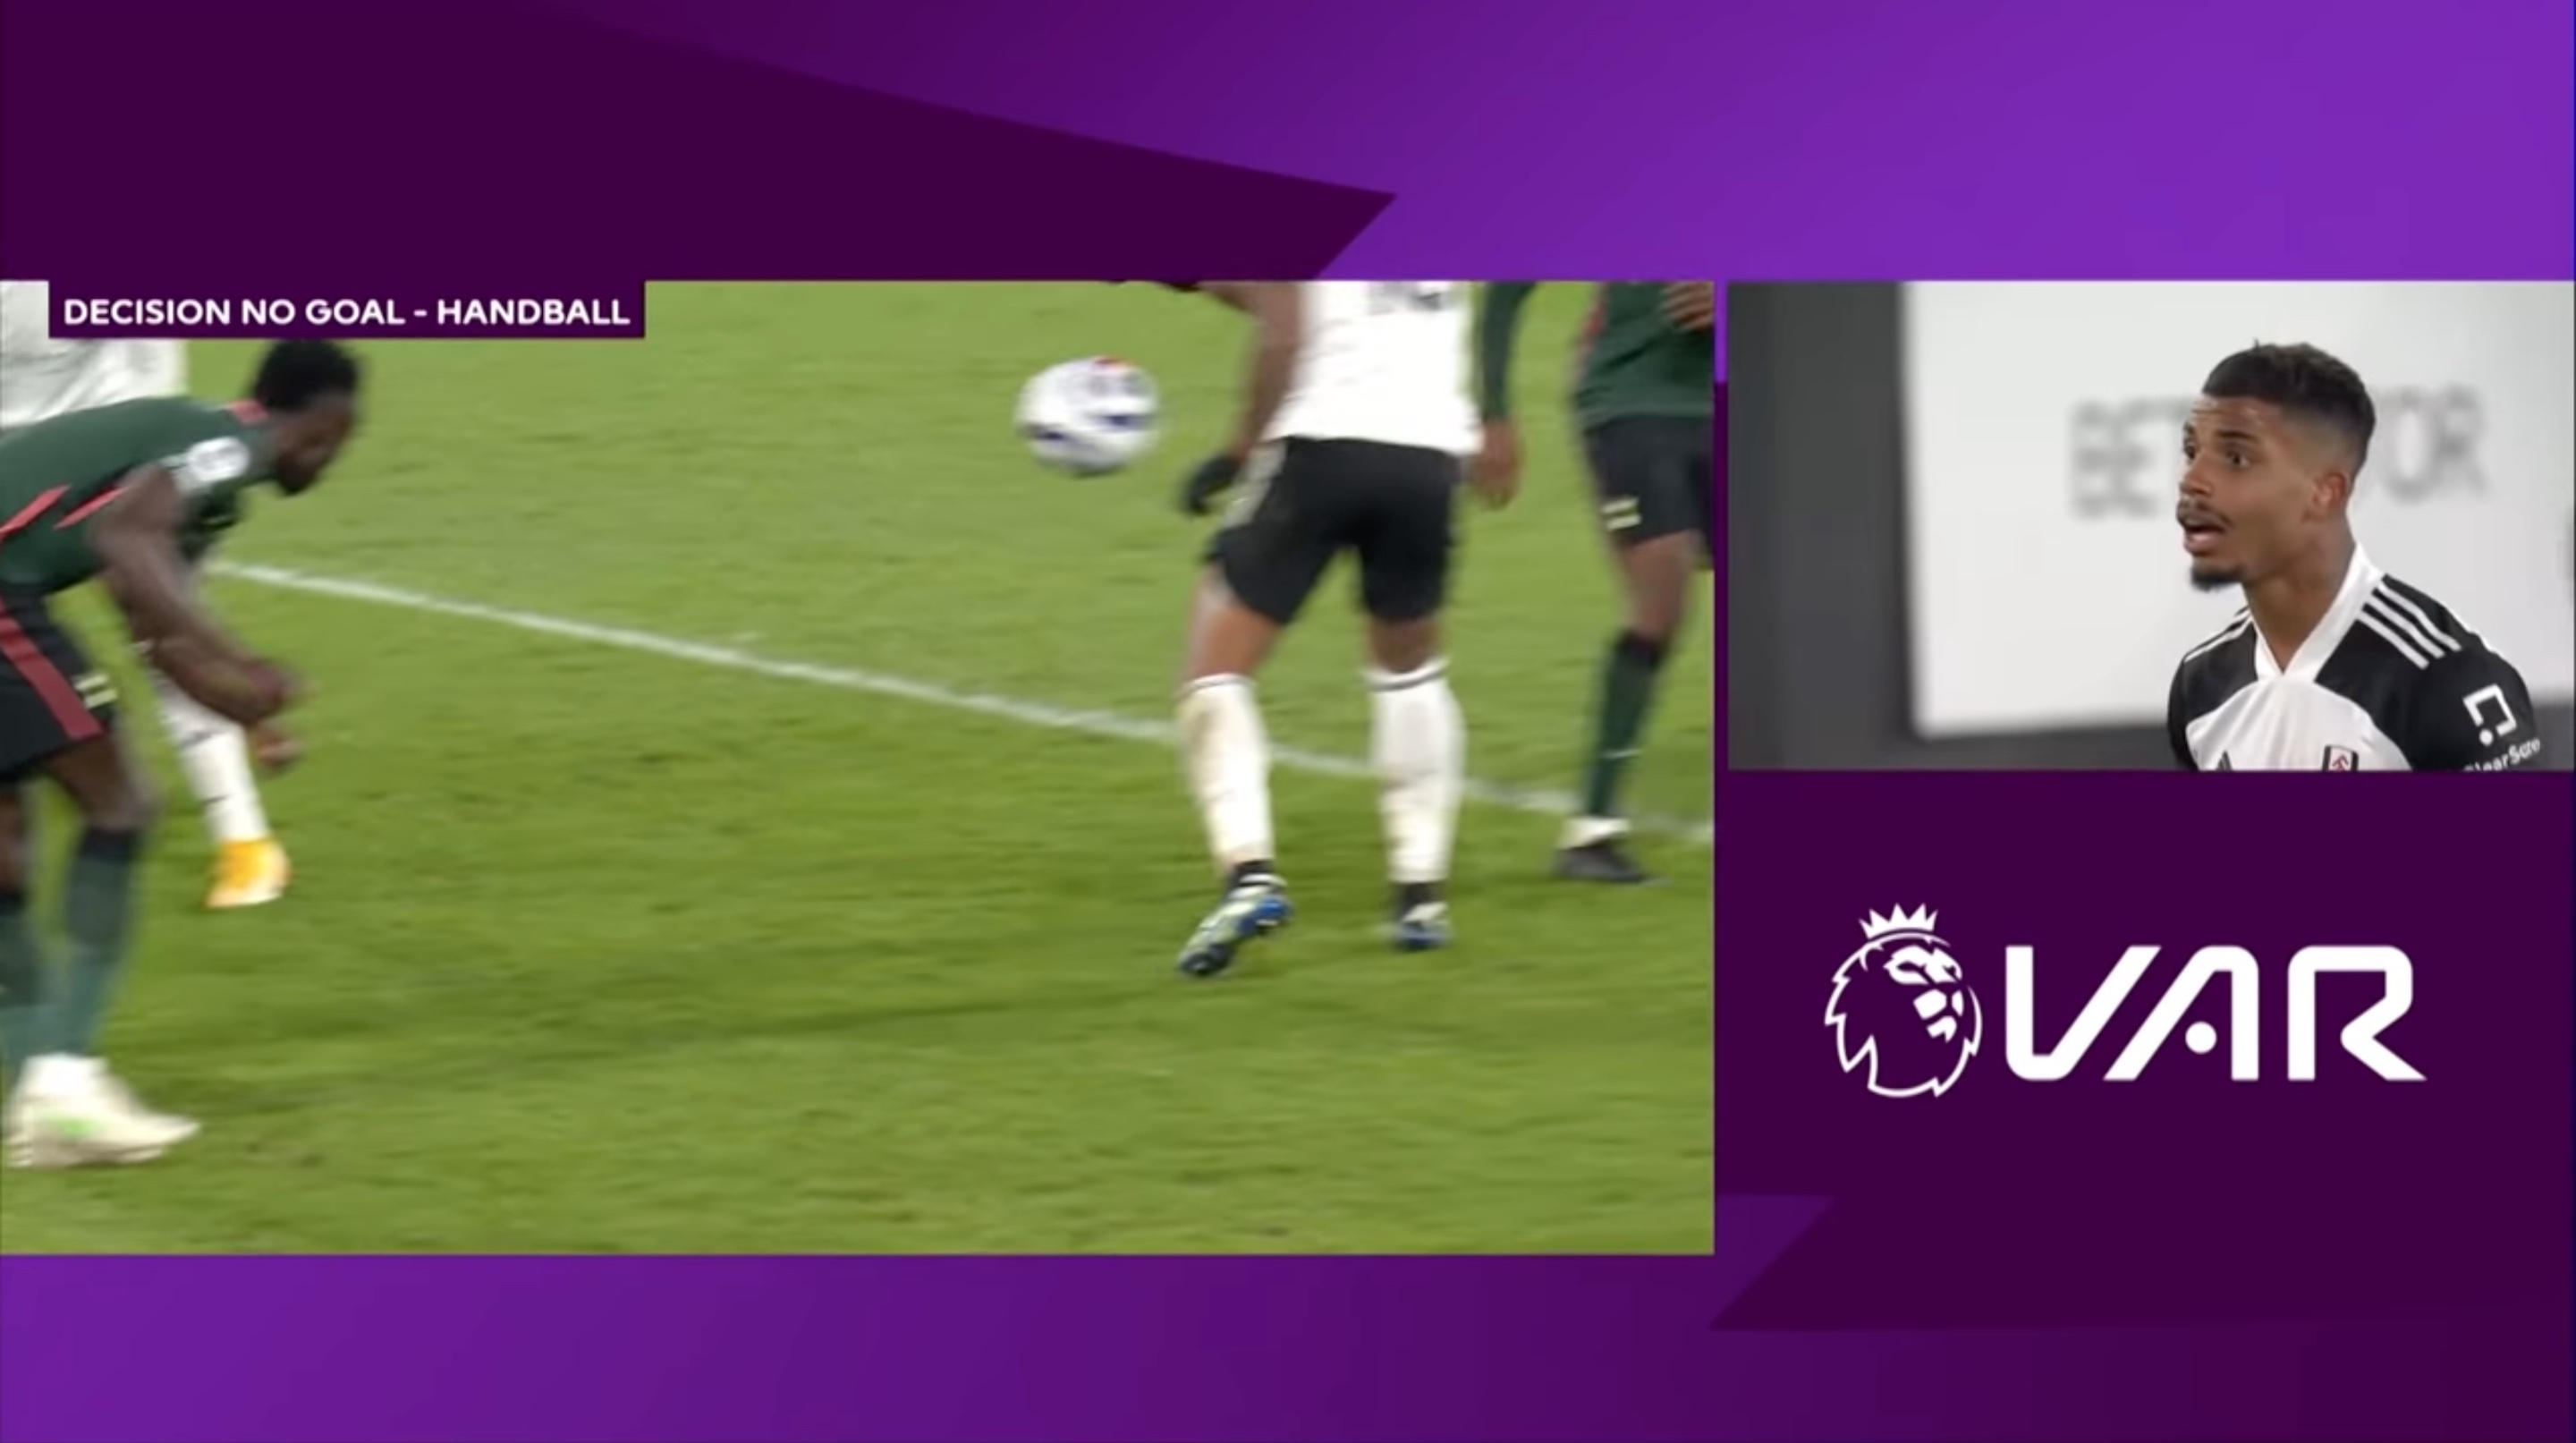 Upon further review, VAR disallows a Fulham goal against Tottenham due to the dumb handball rule.